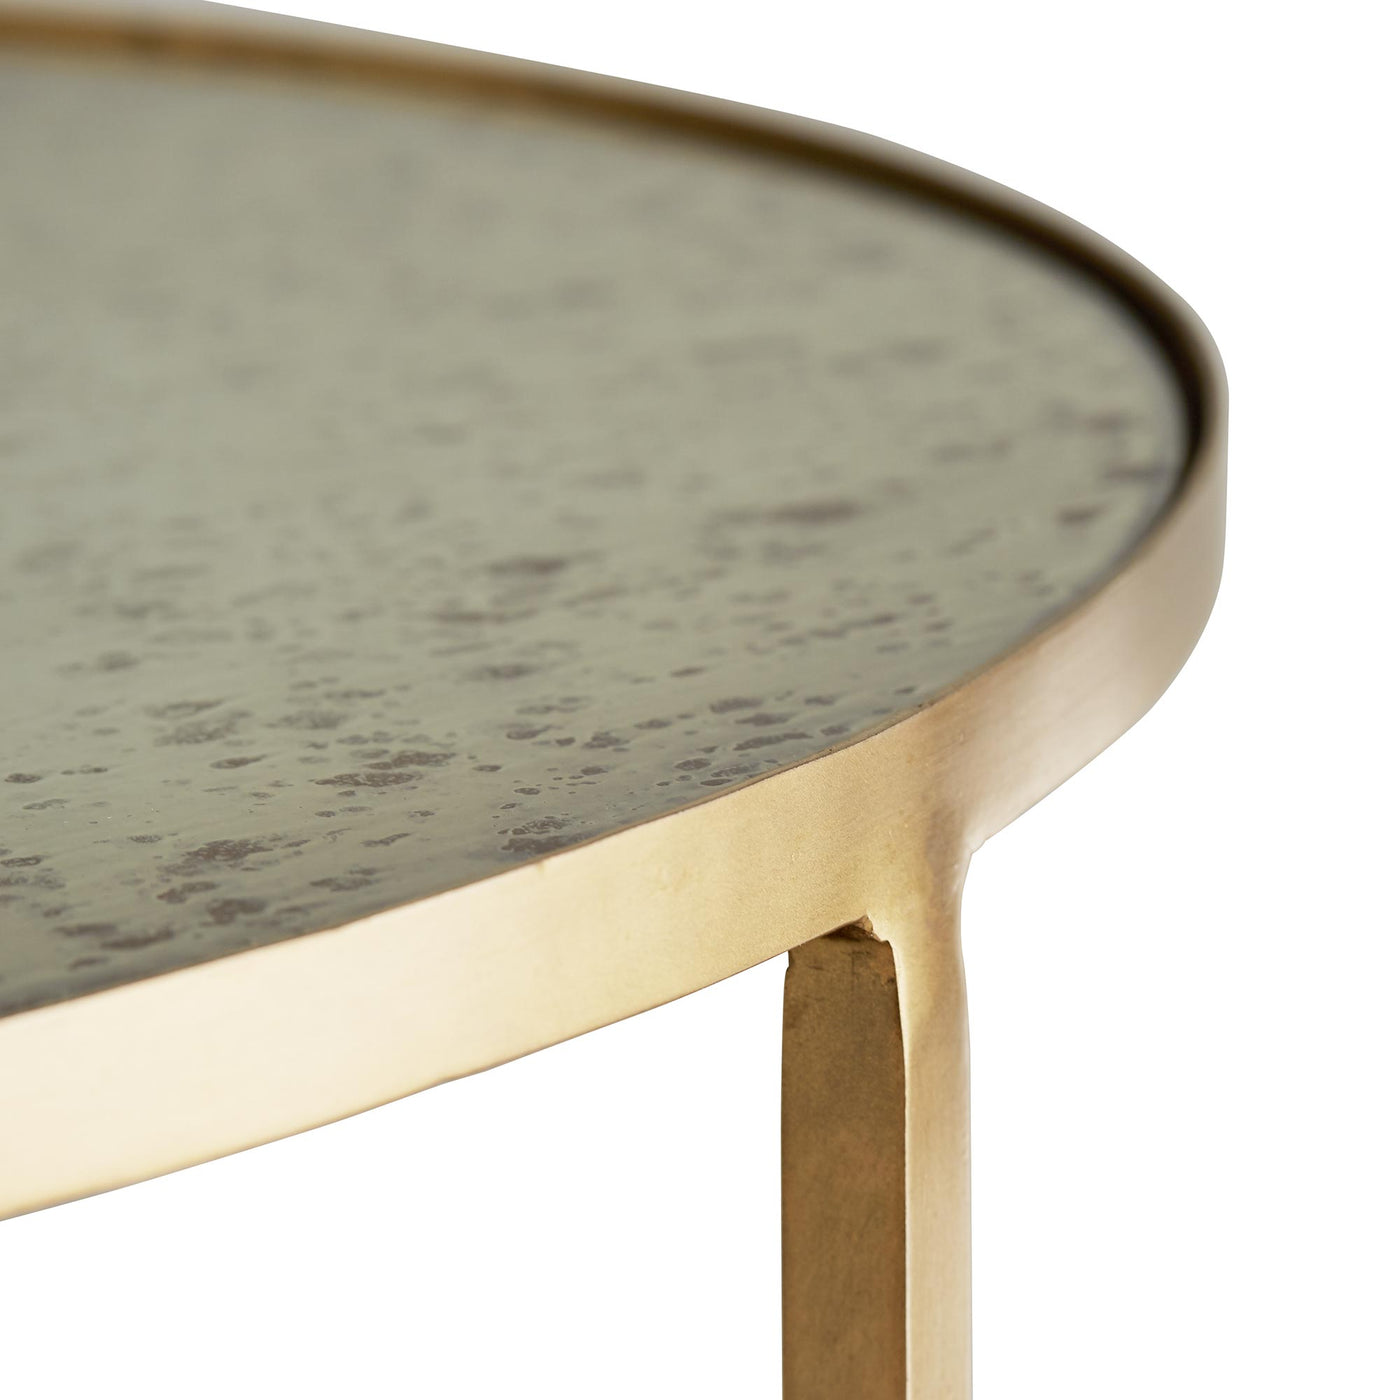 SIDE TABLE ROUND 3-TIER MIRRORED ANTIQUE BRASS